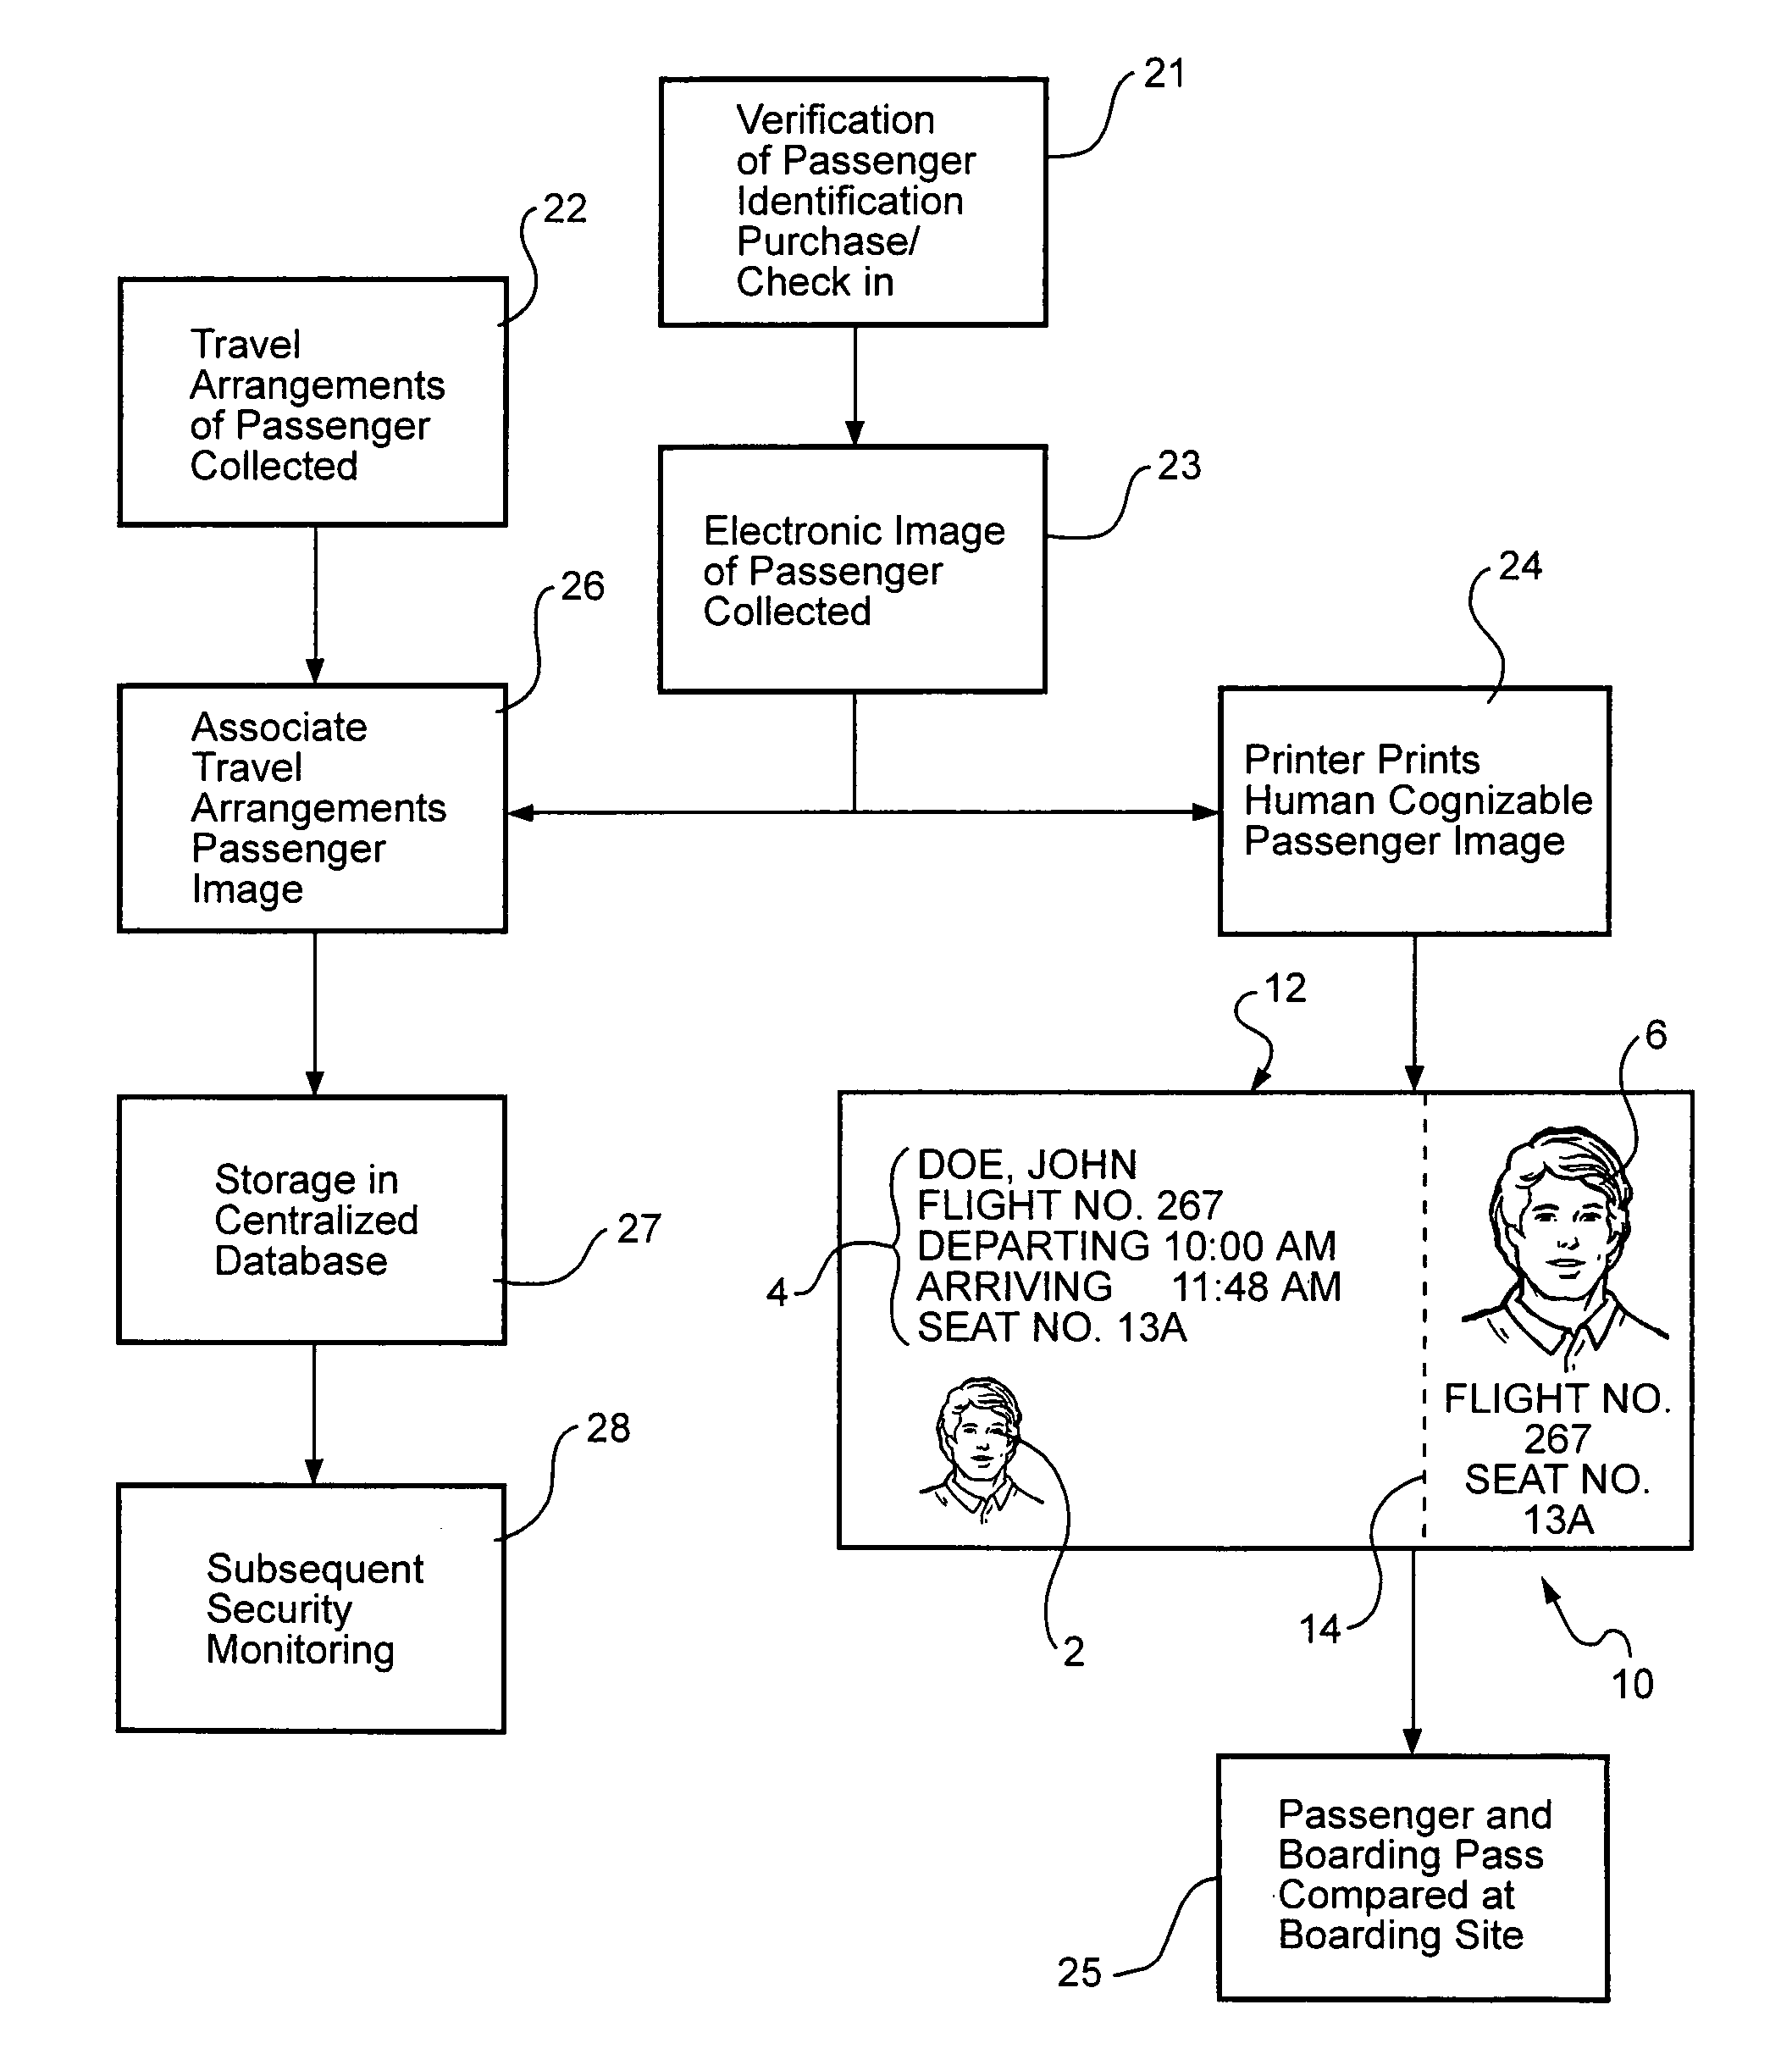 Method for verifying the identity of a passenger